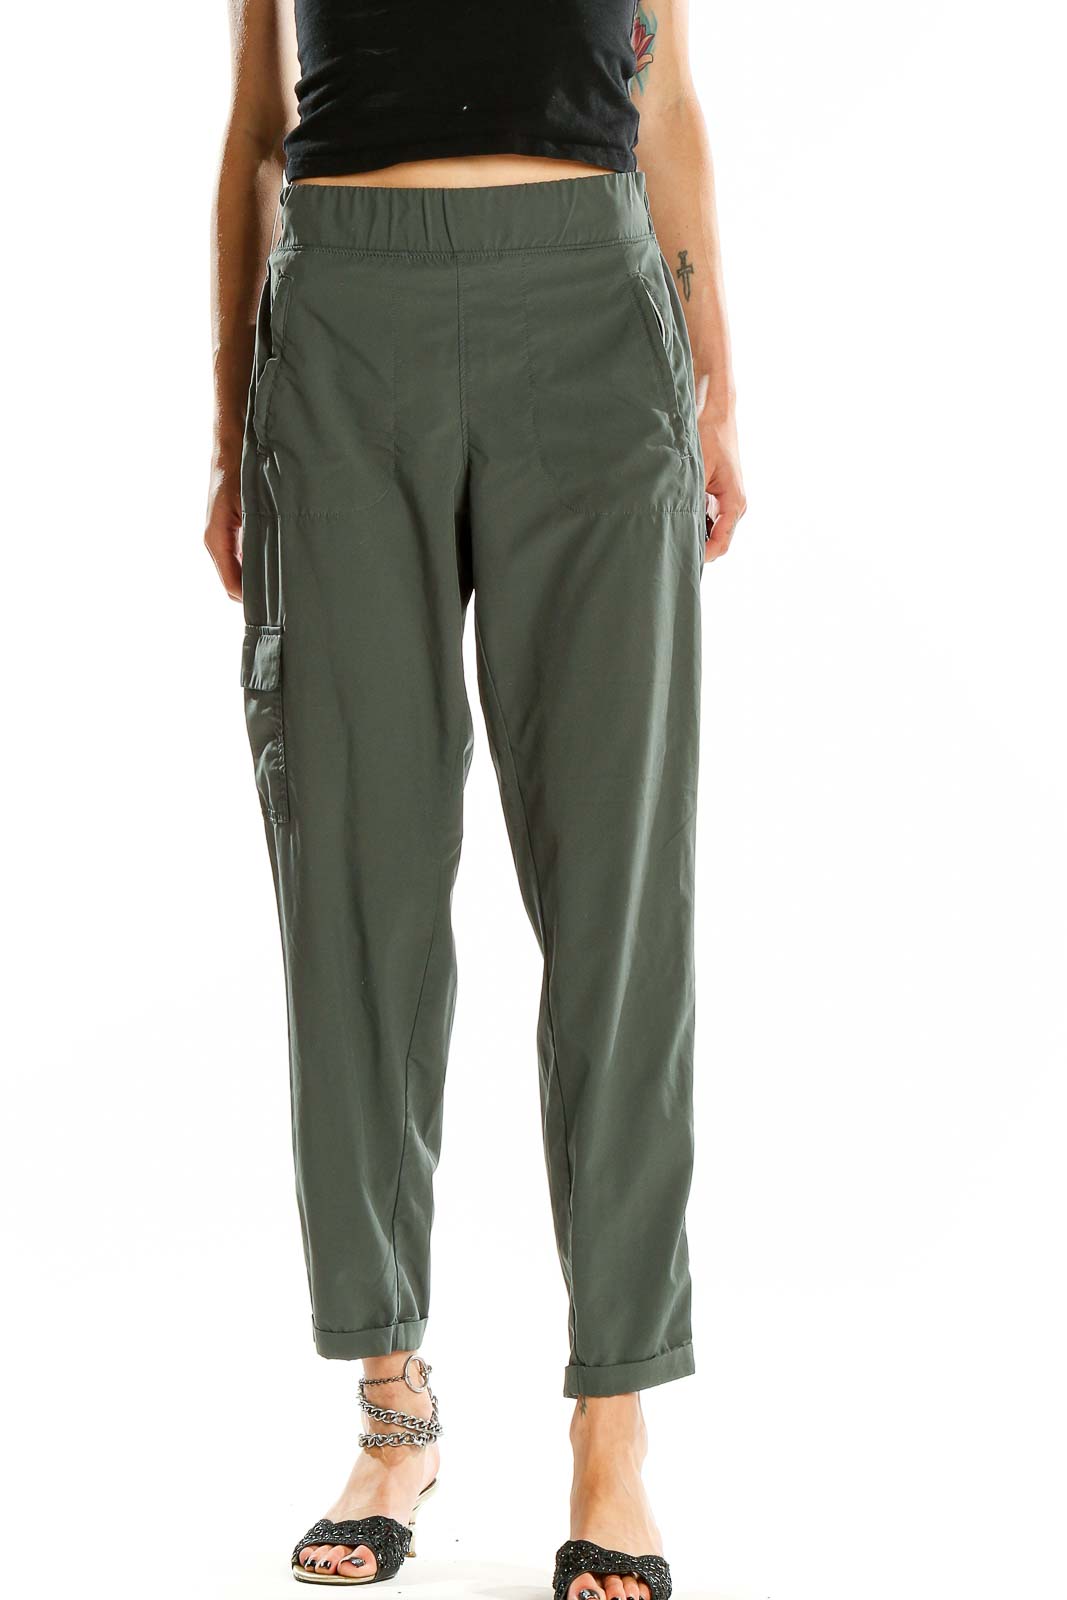 Green Slim Solid Pants Front